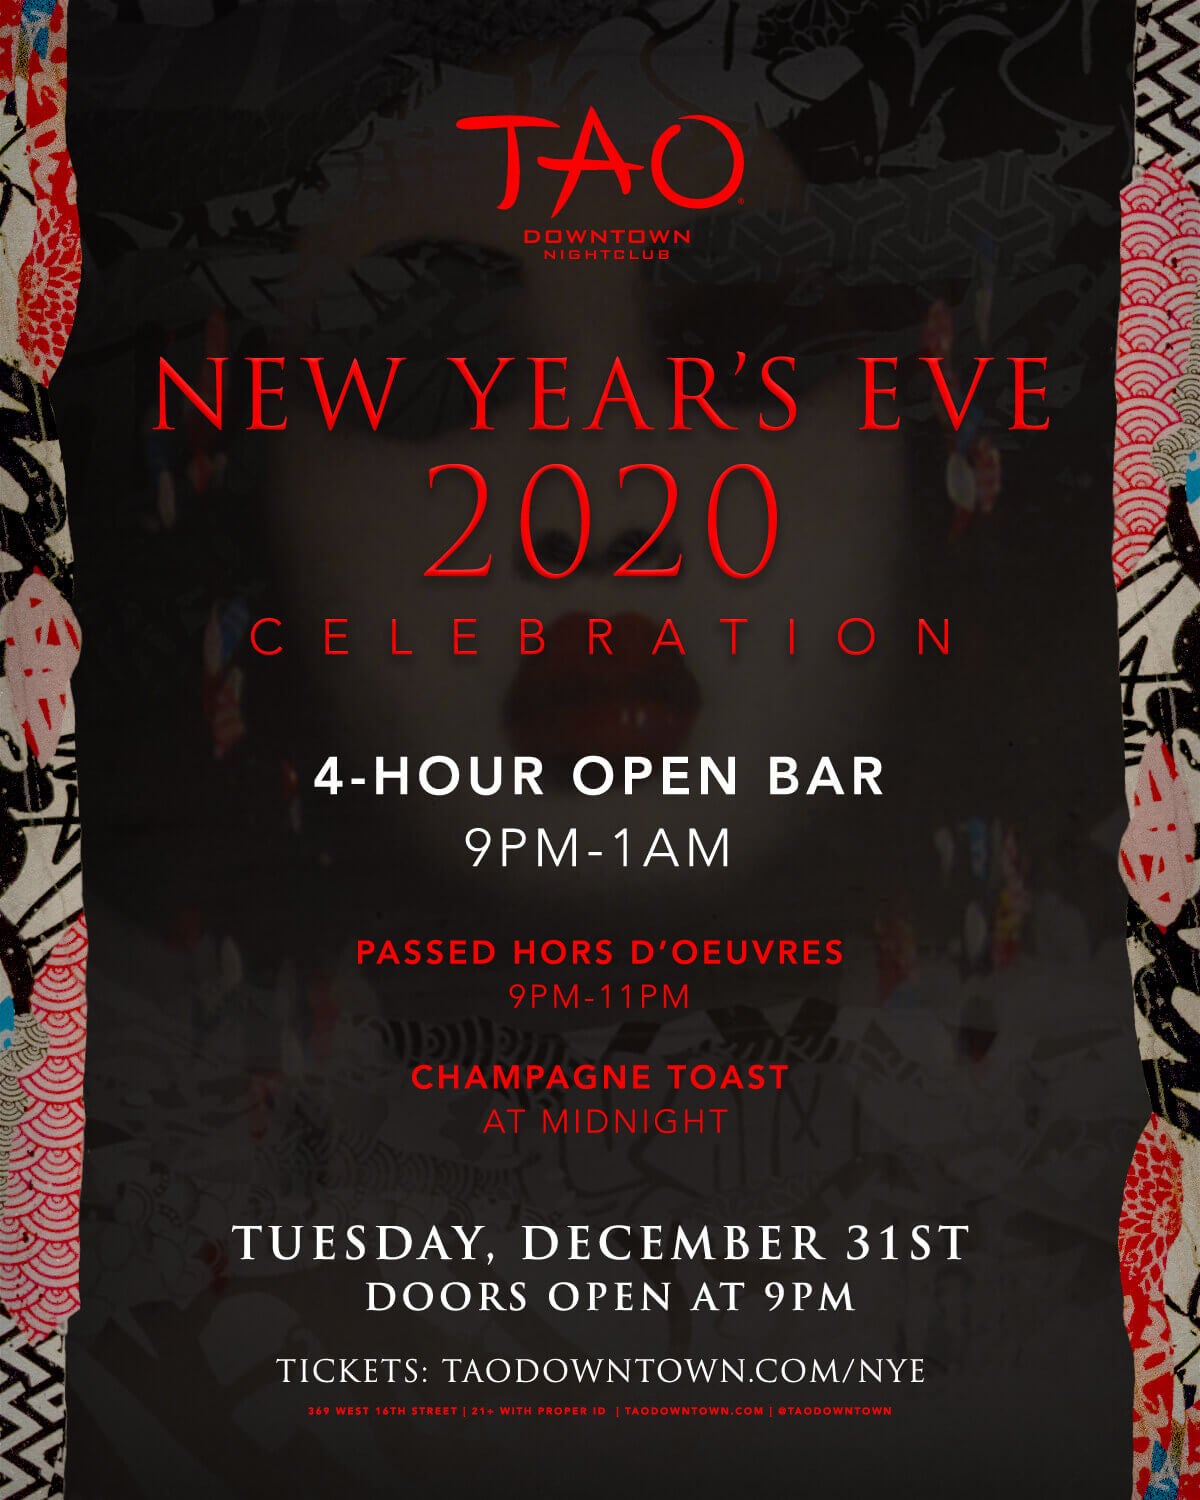 tao downtown age limit